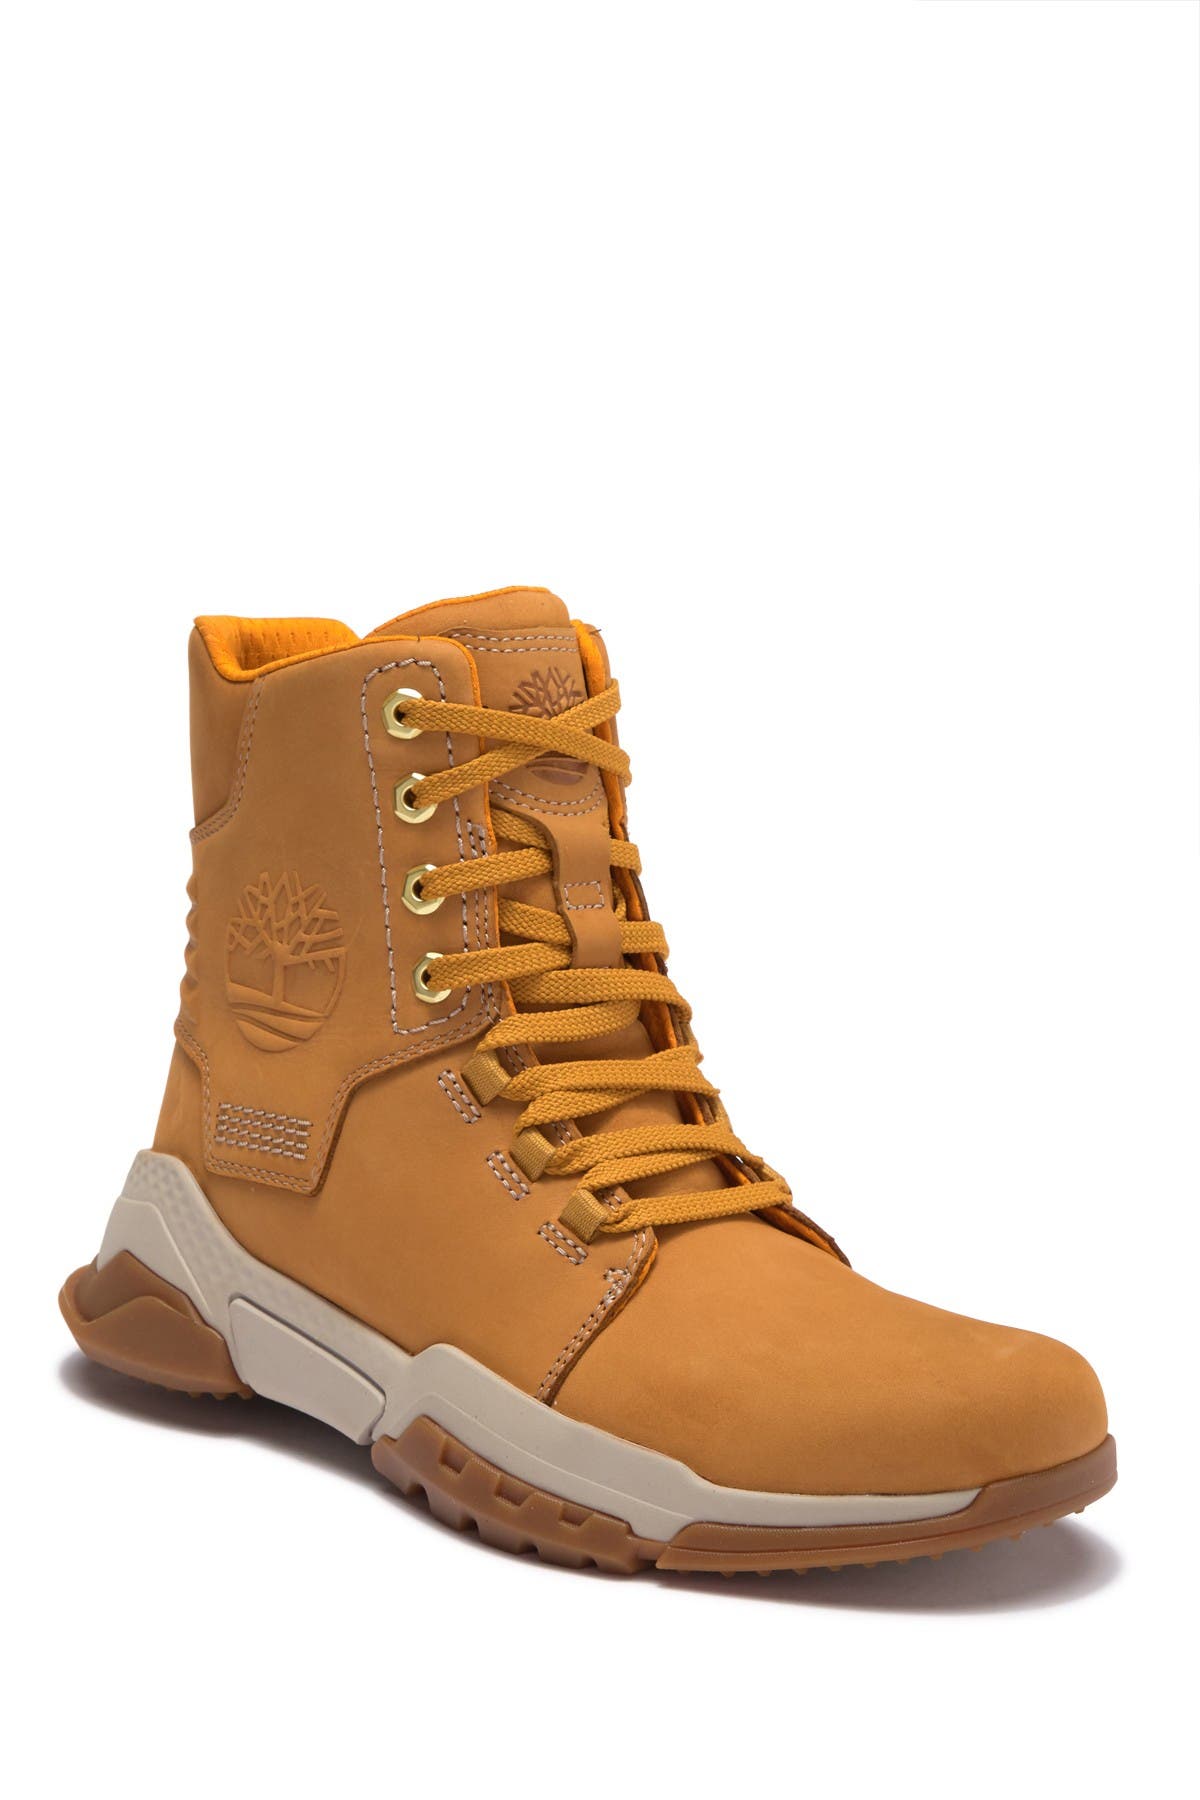 the city force timberland